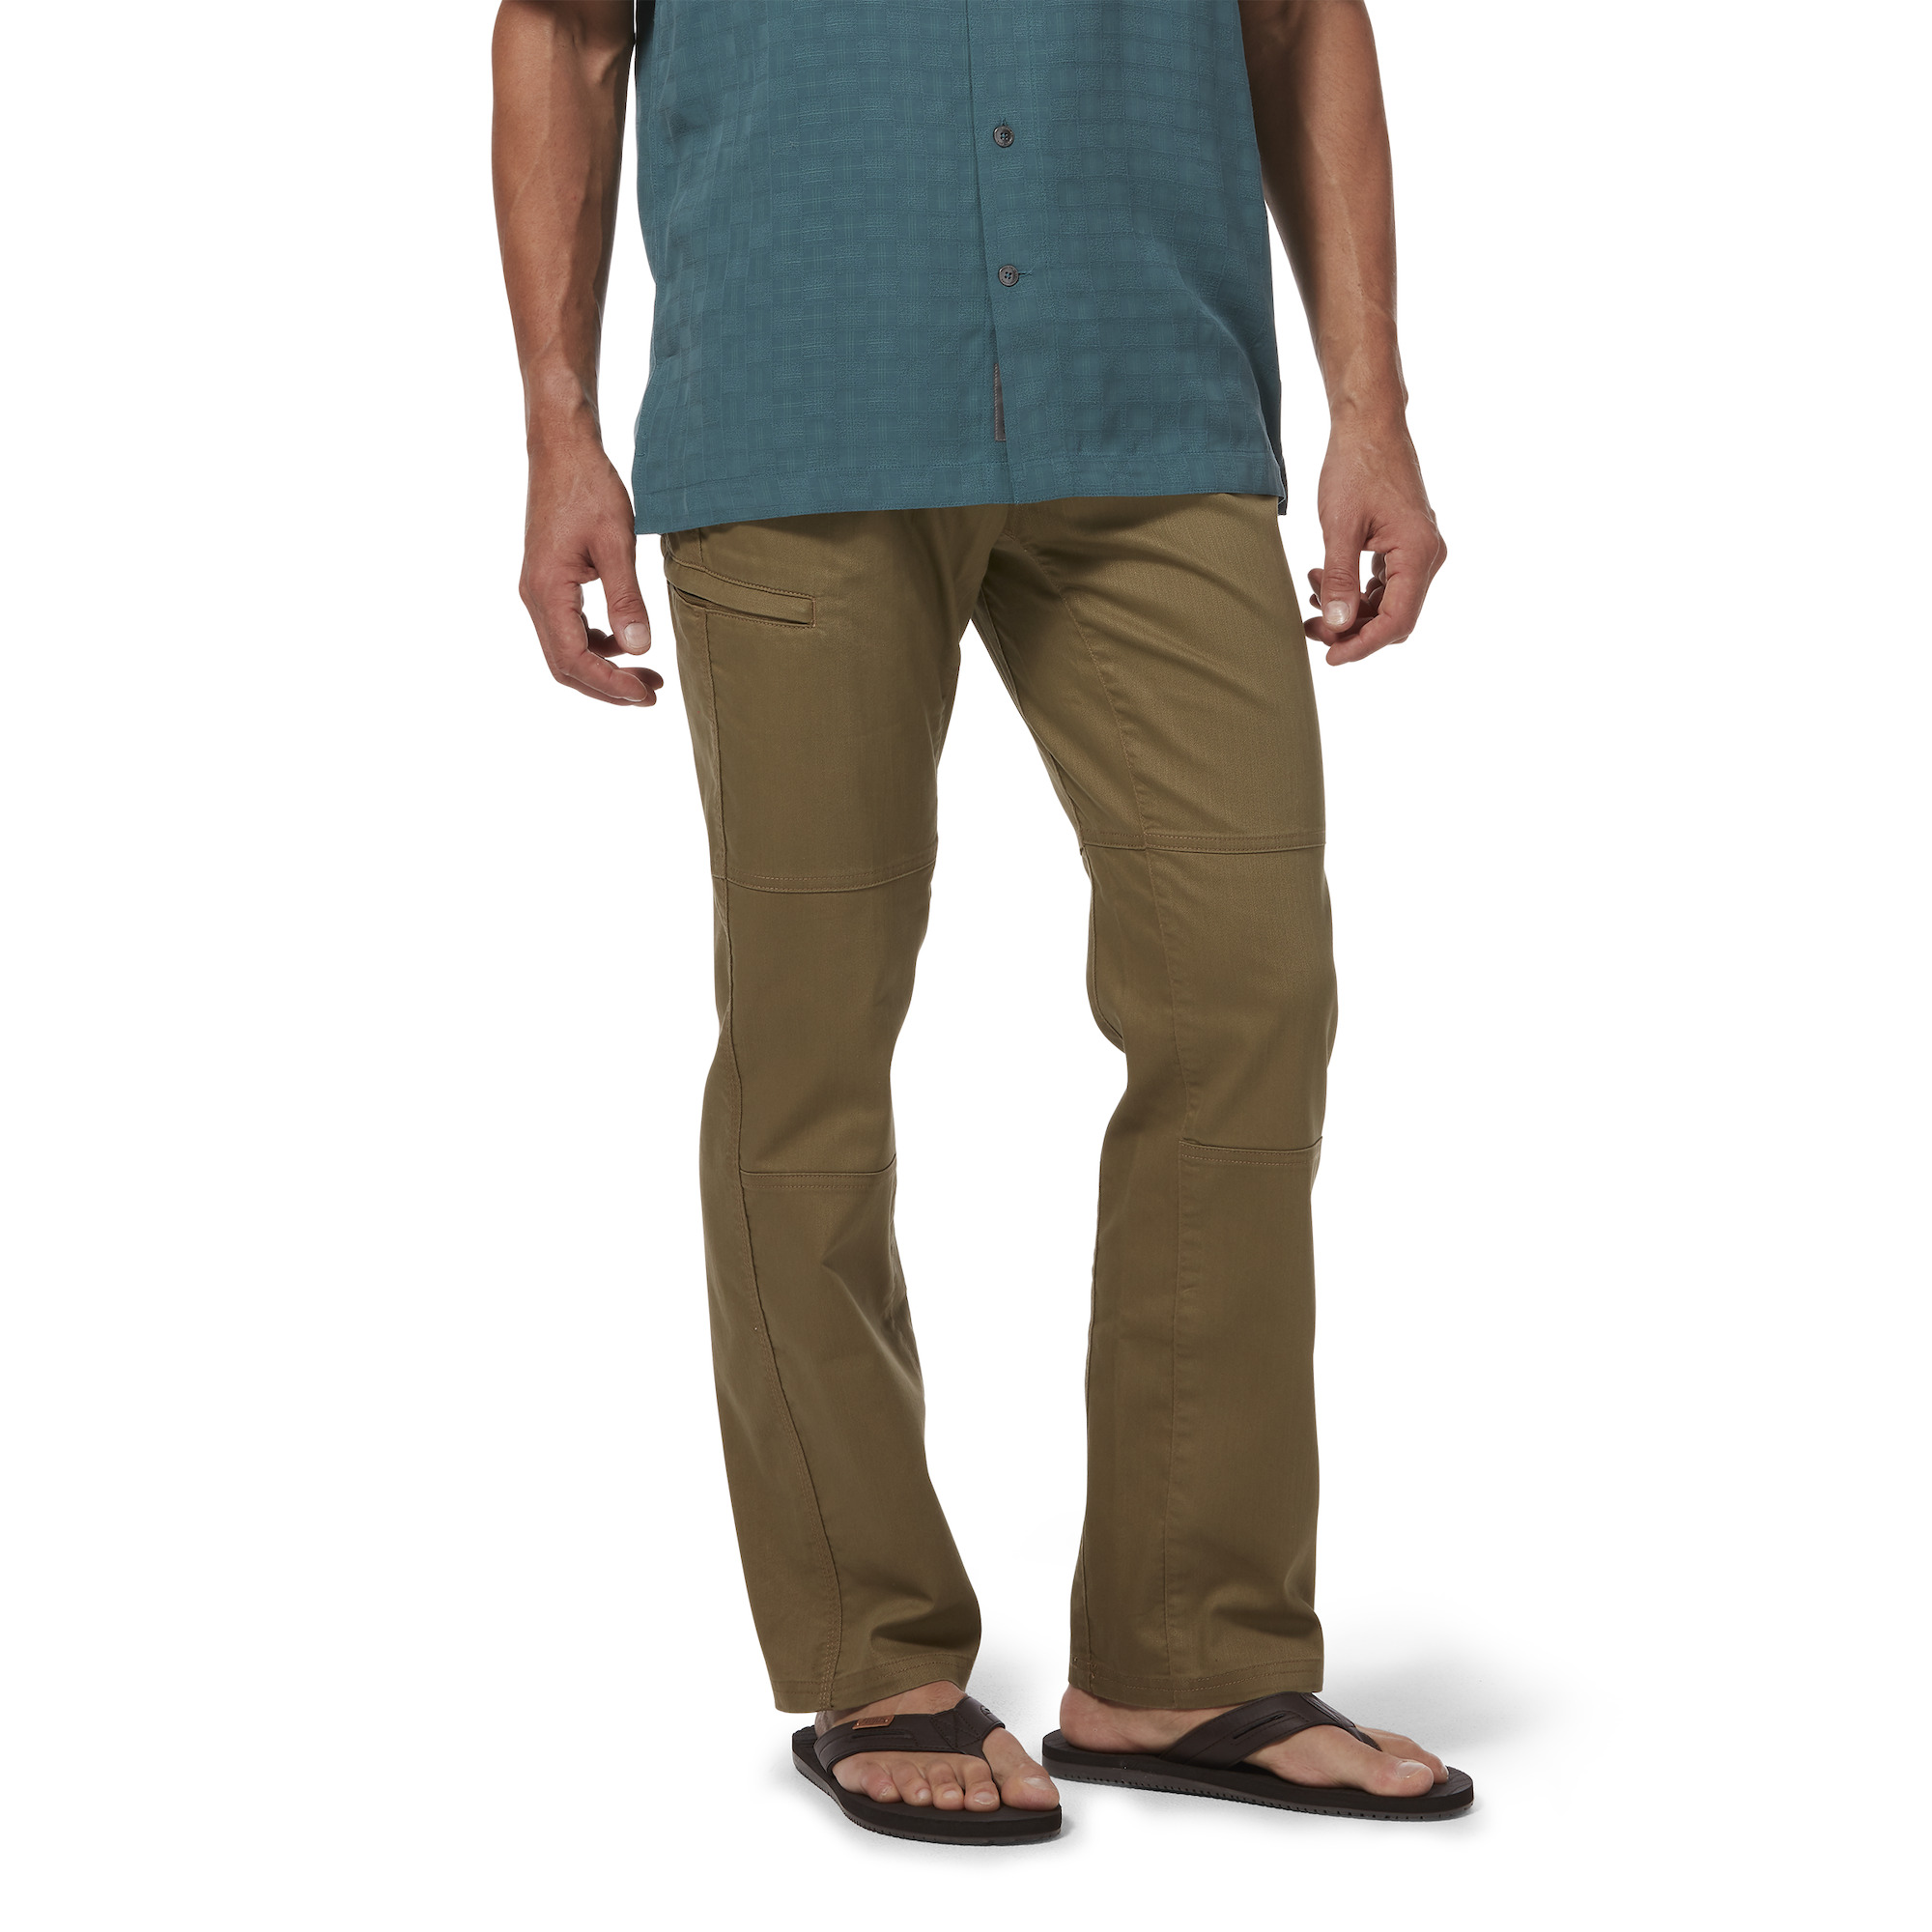 Royal Robbins clothing collections for men